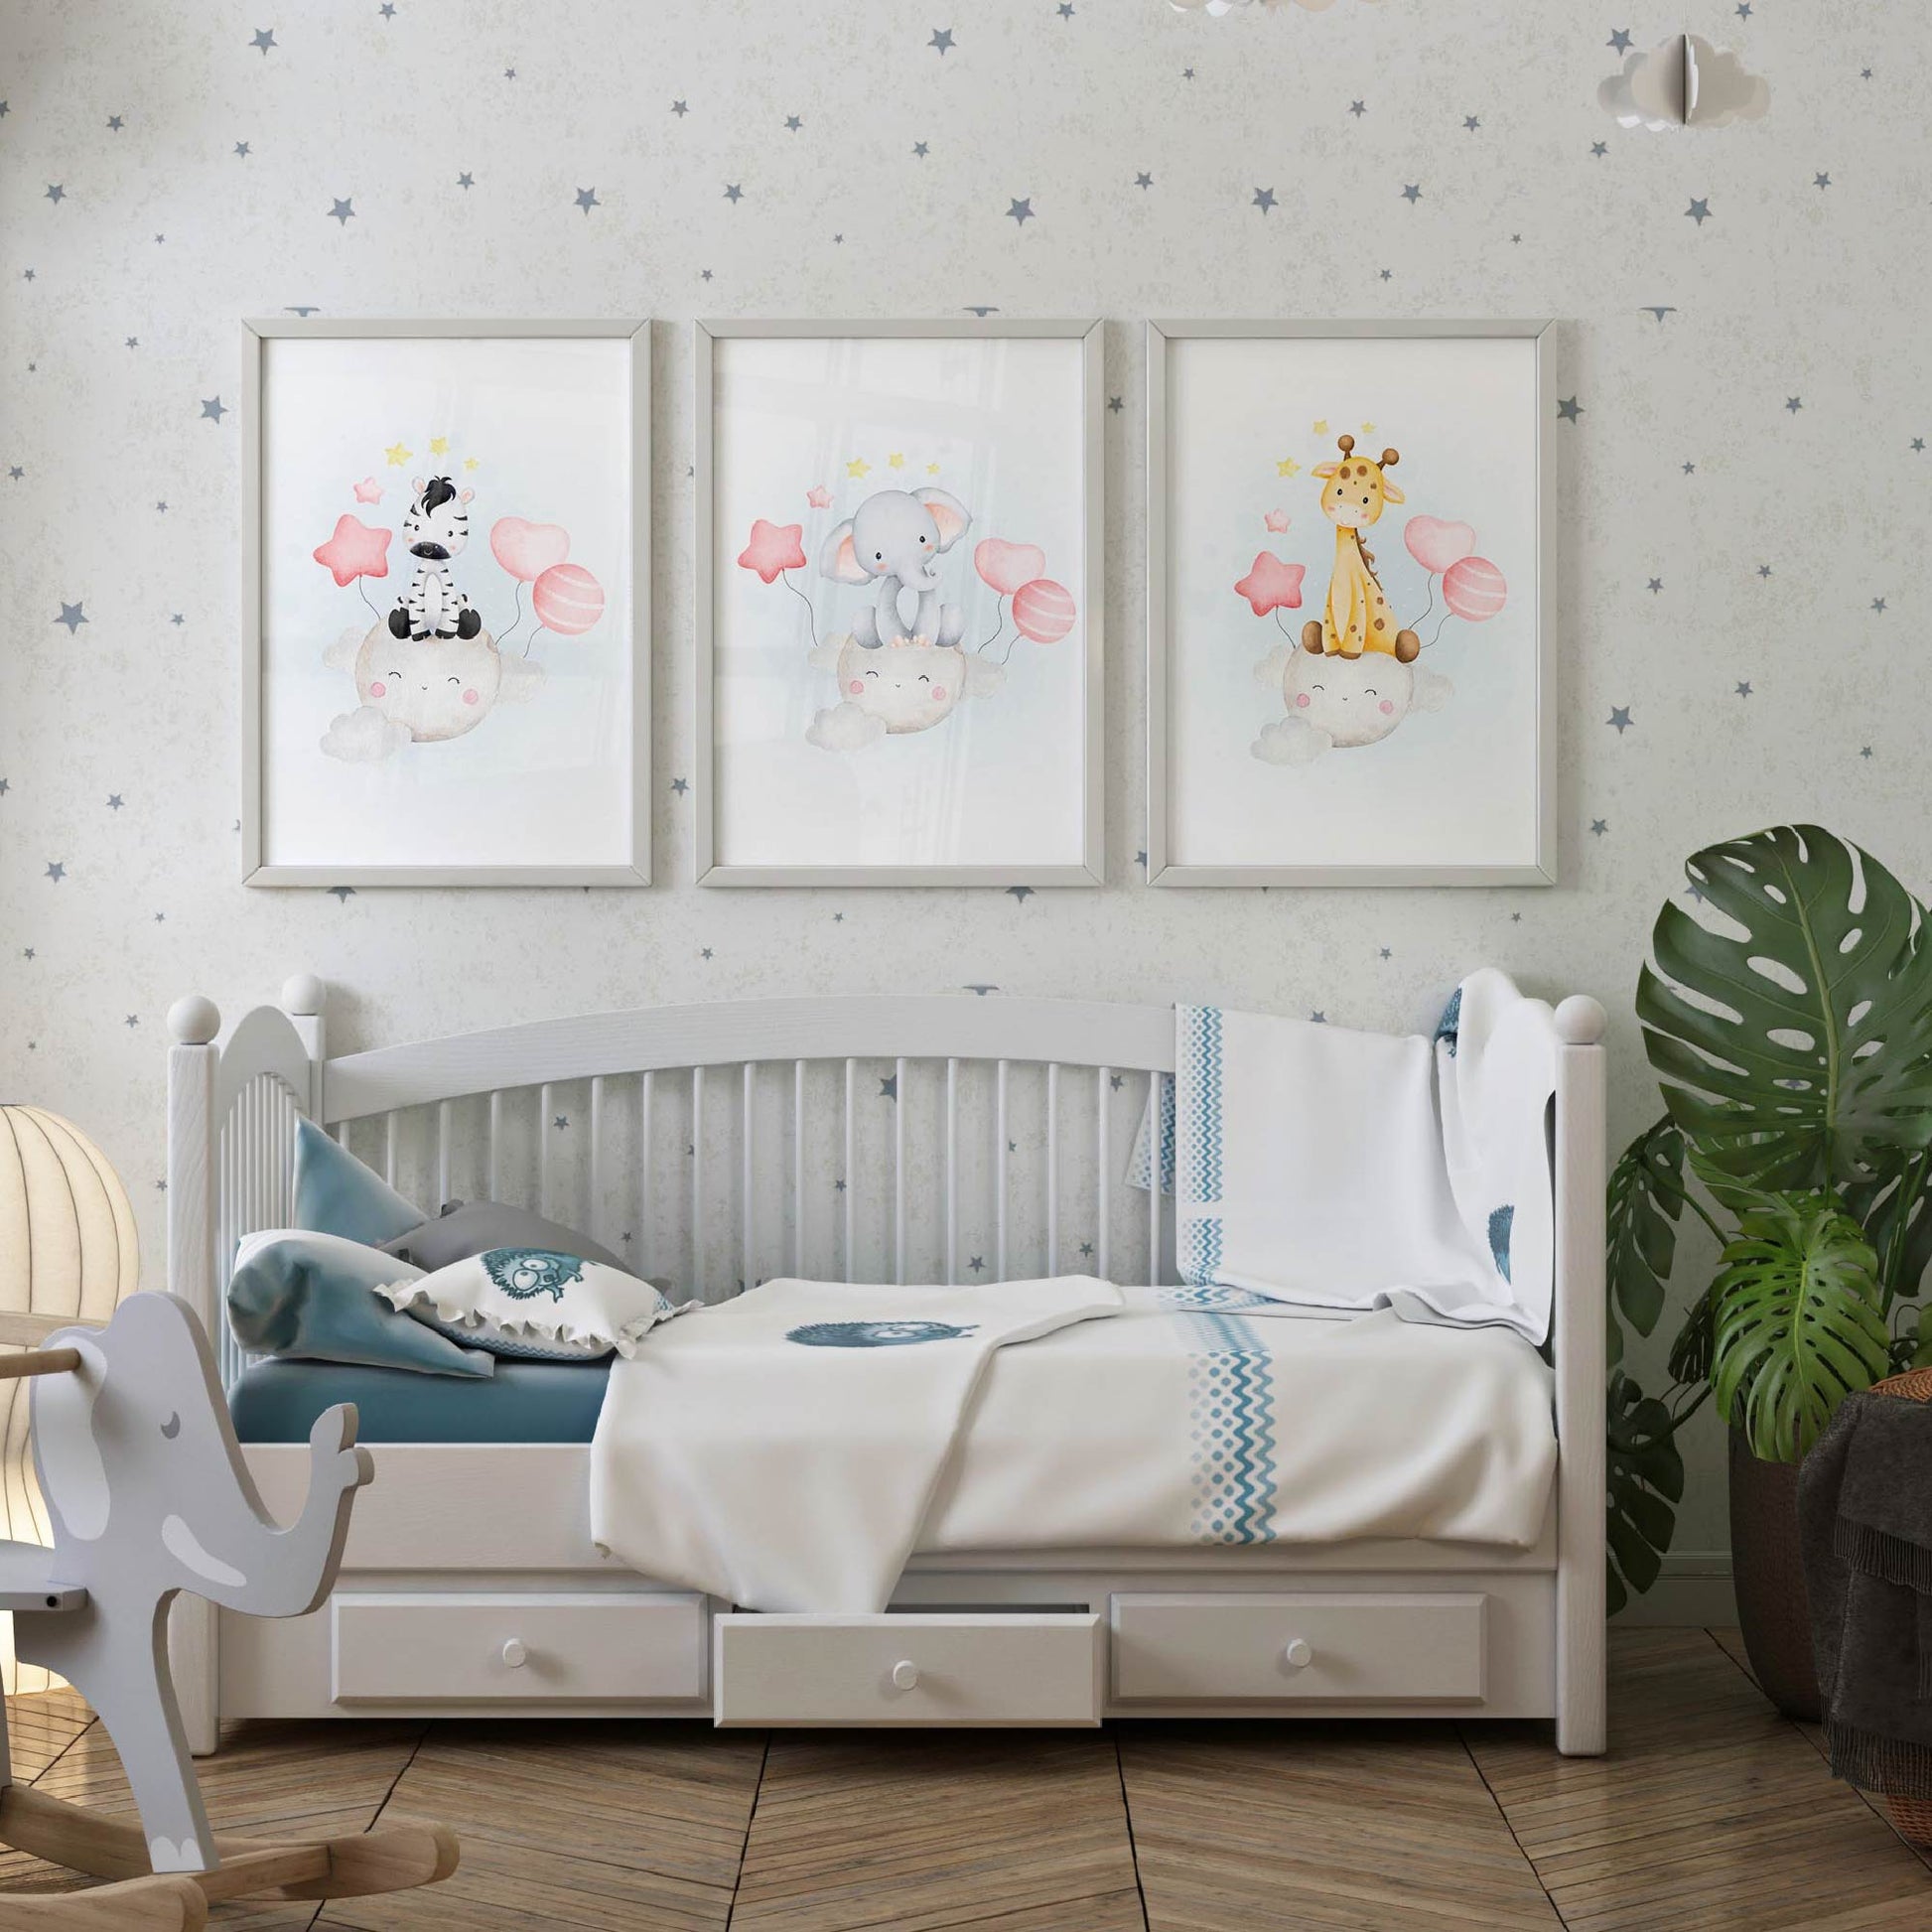 Three personalized animal-themed baby shower prints in framed canvas.